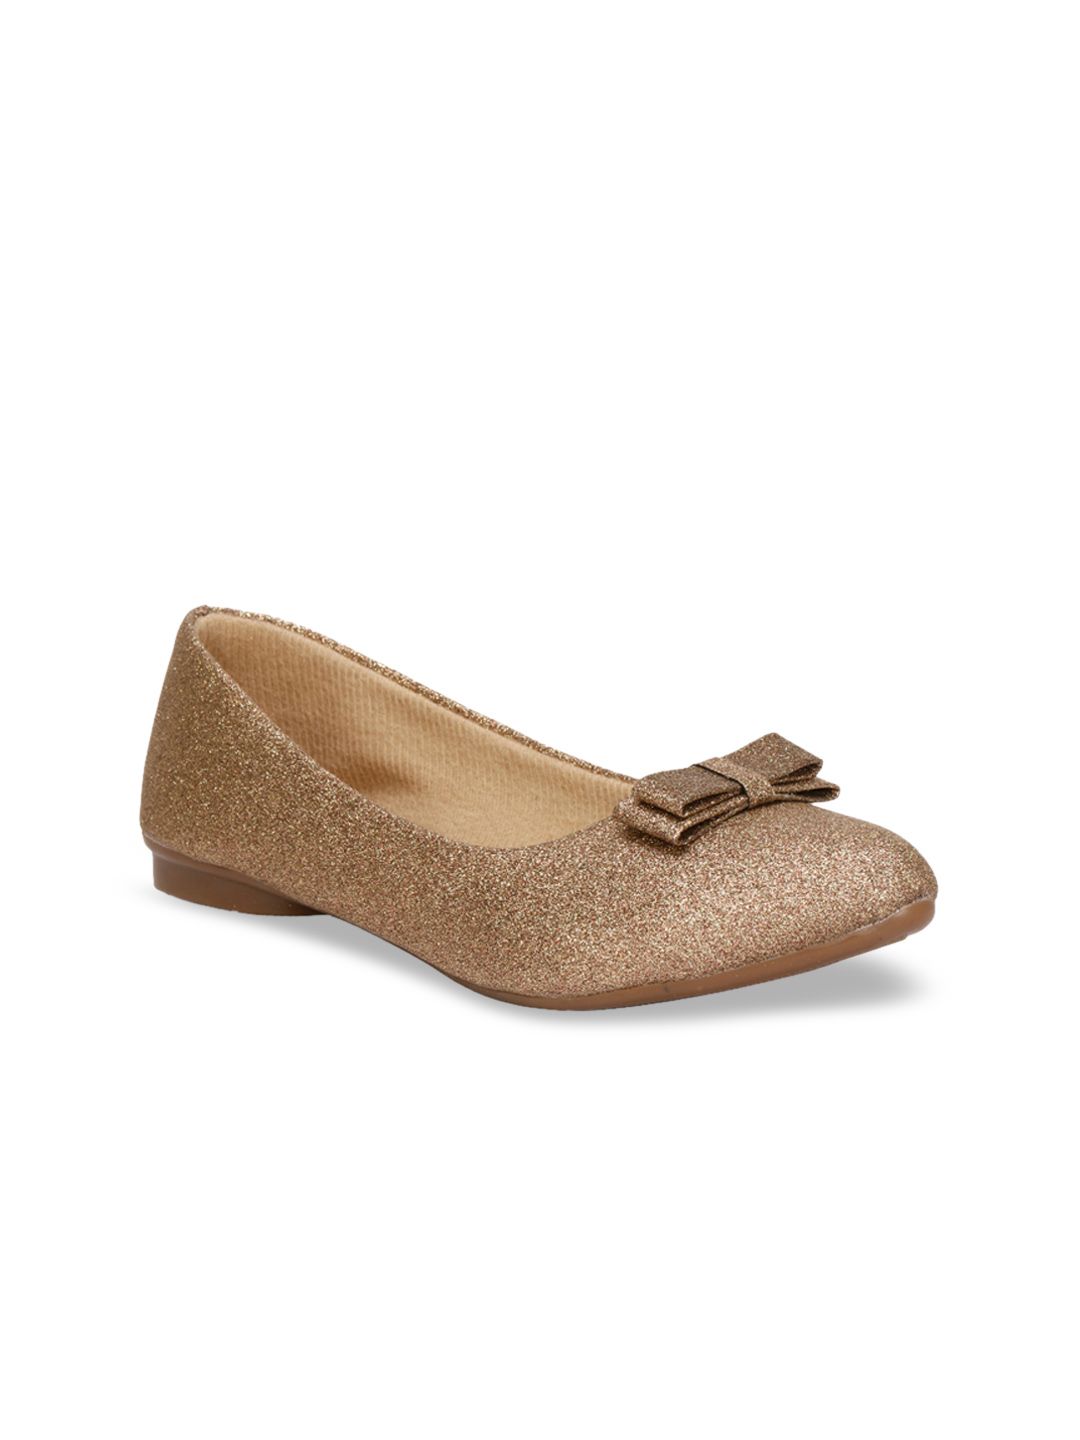 Denill Women Copper-Toned Ballerinas with Bows Flats Price in India